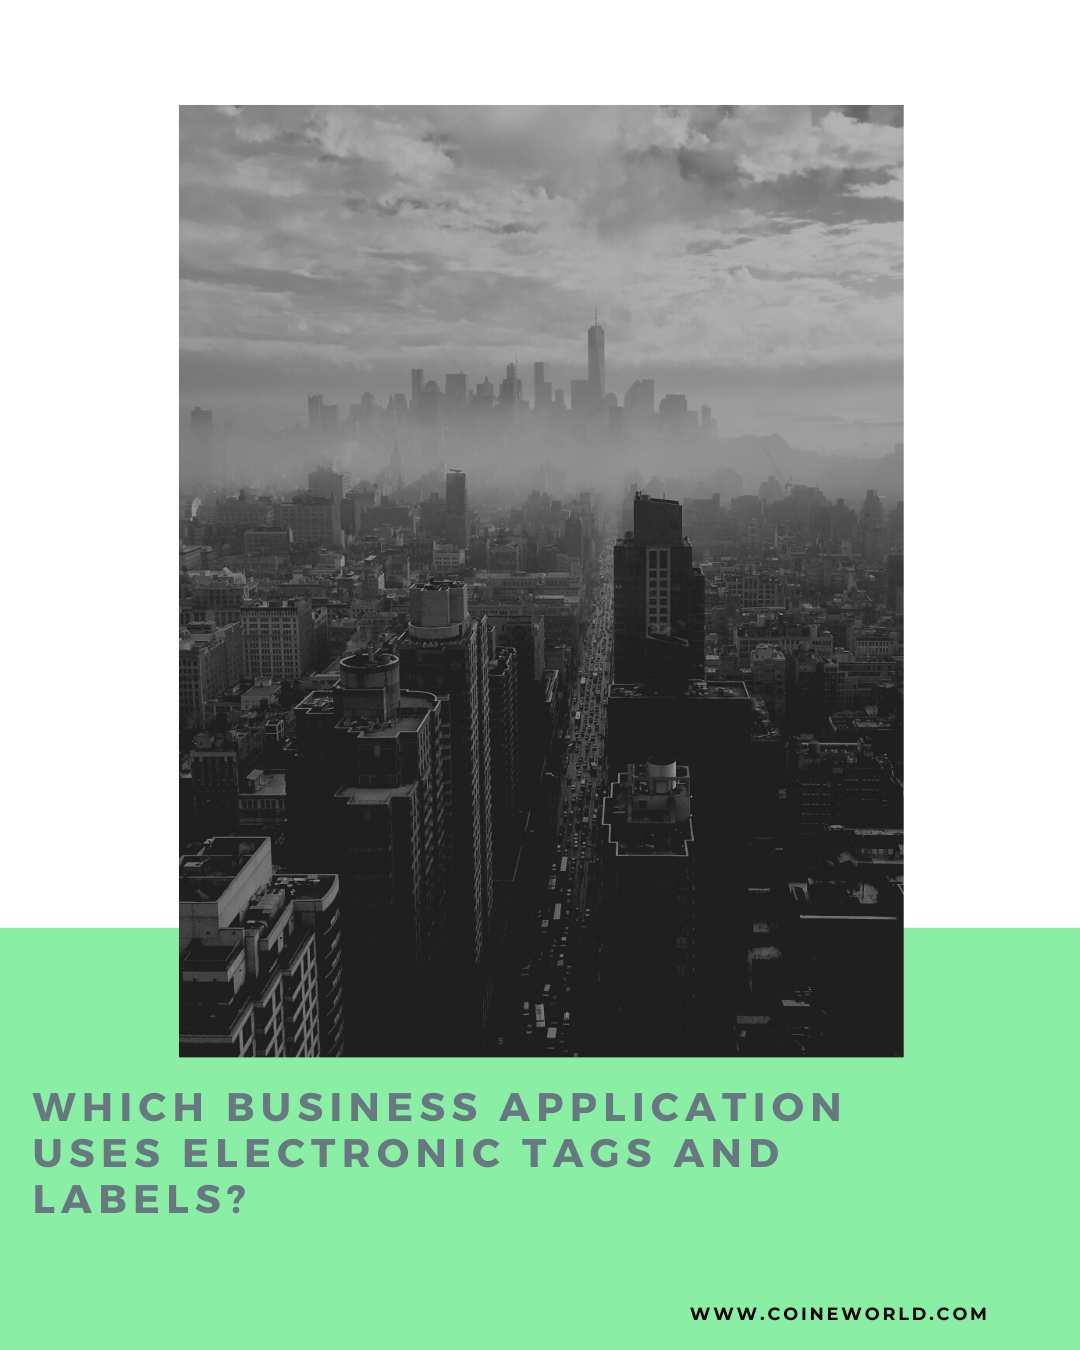 Which business application uses electronic tags and labels?